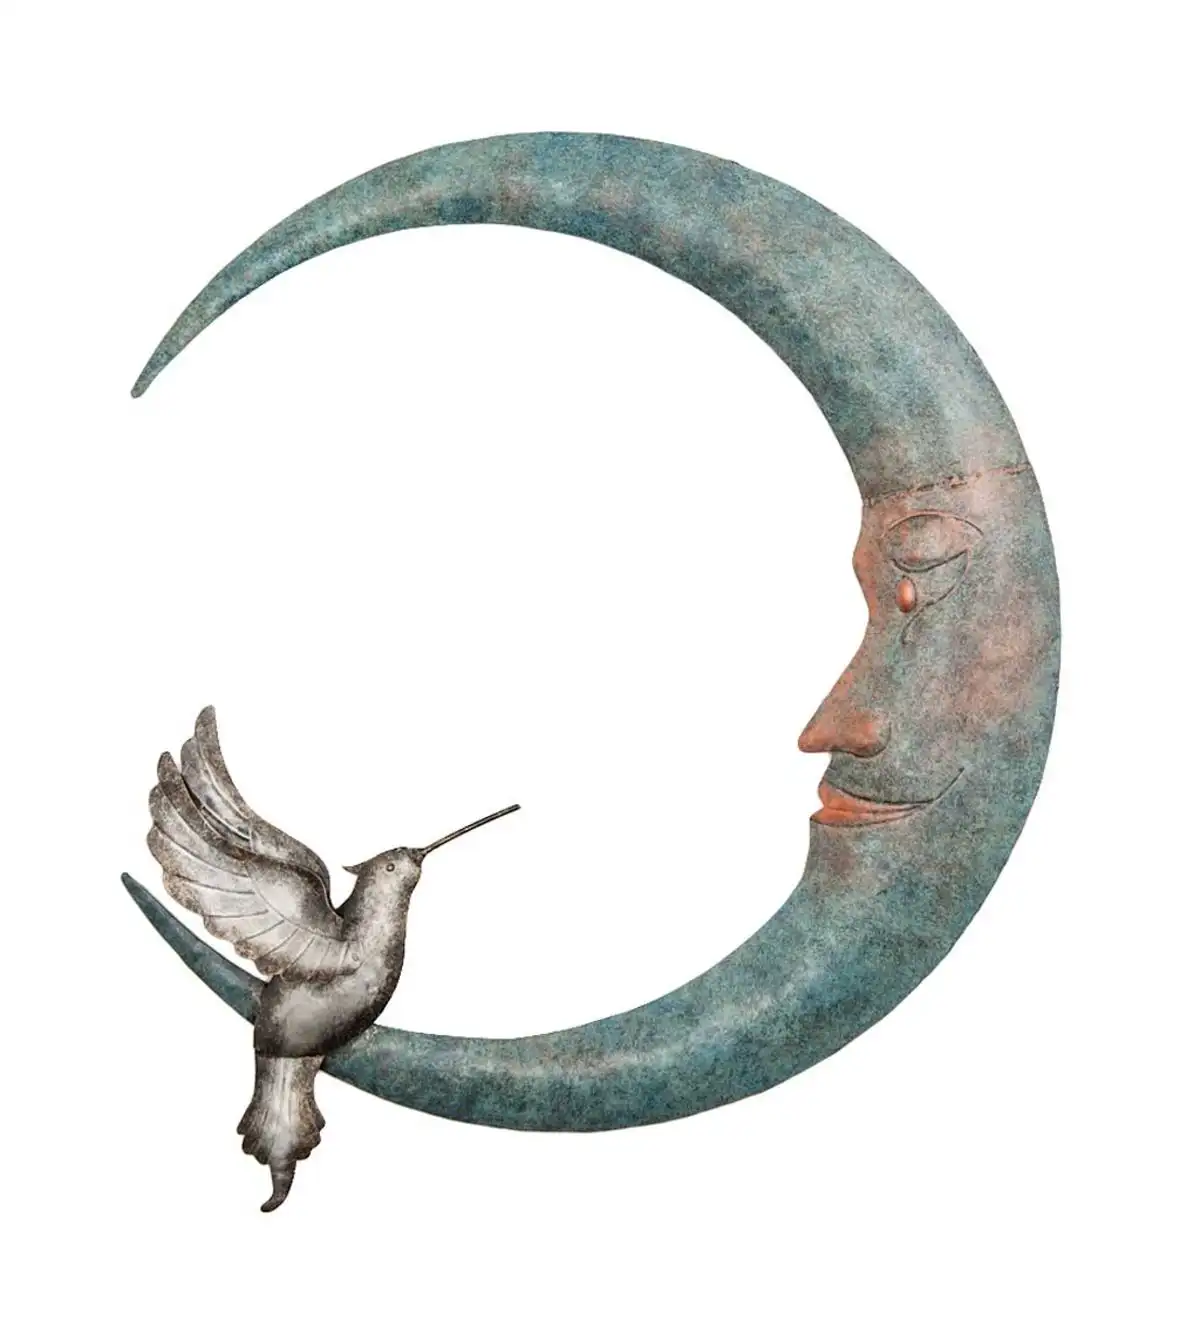 Modern Bohemian Metal Crescent Moon with Bird Metal Wall Hanging Decor Art by Medieval Edge